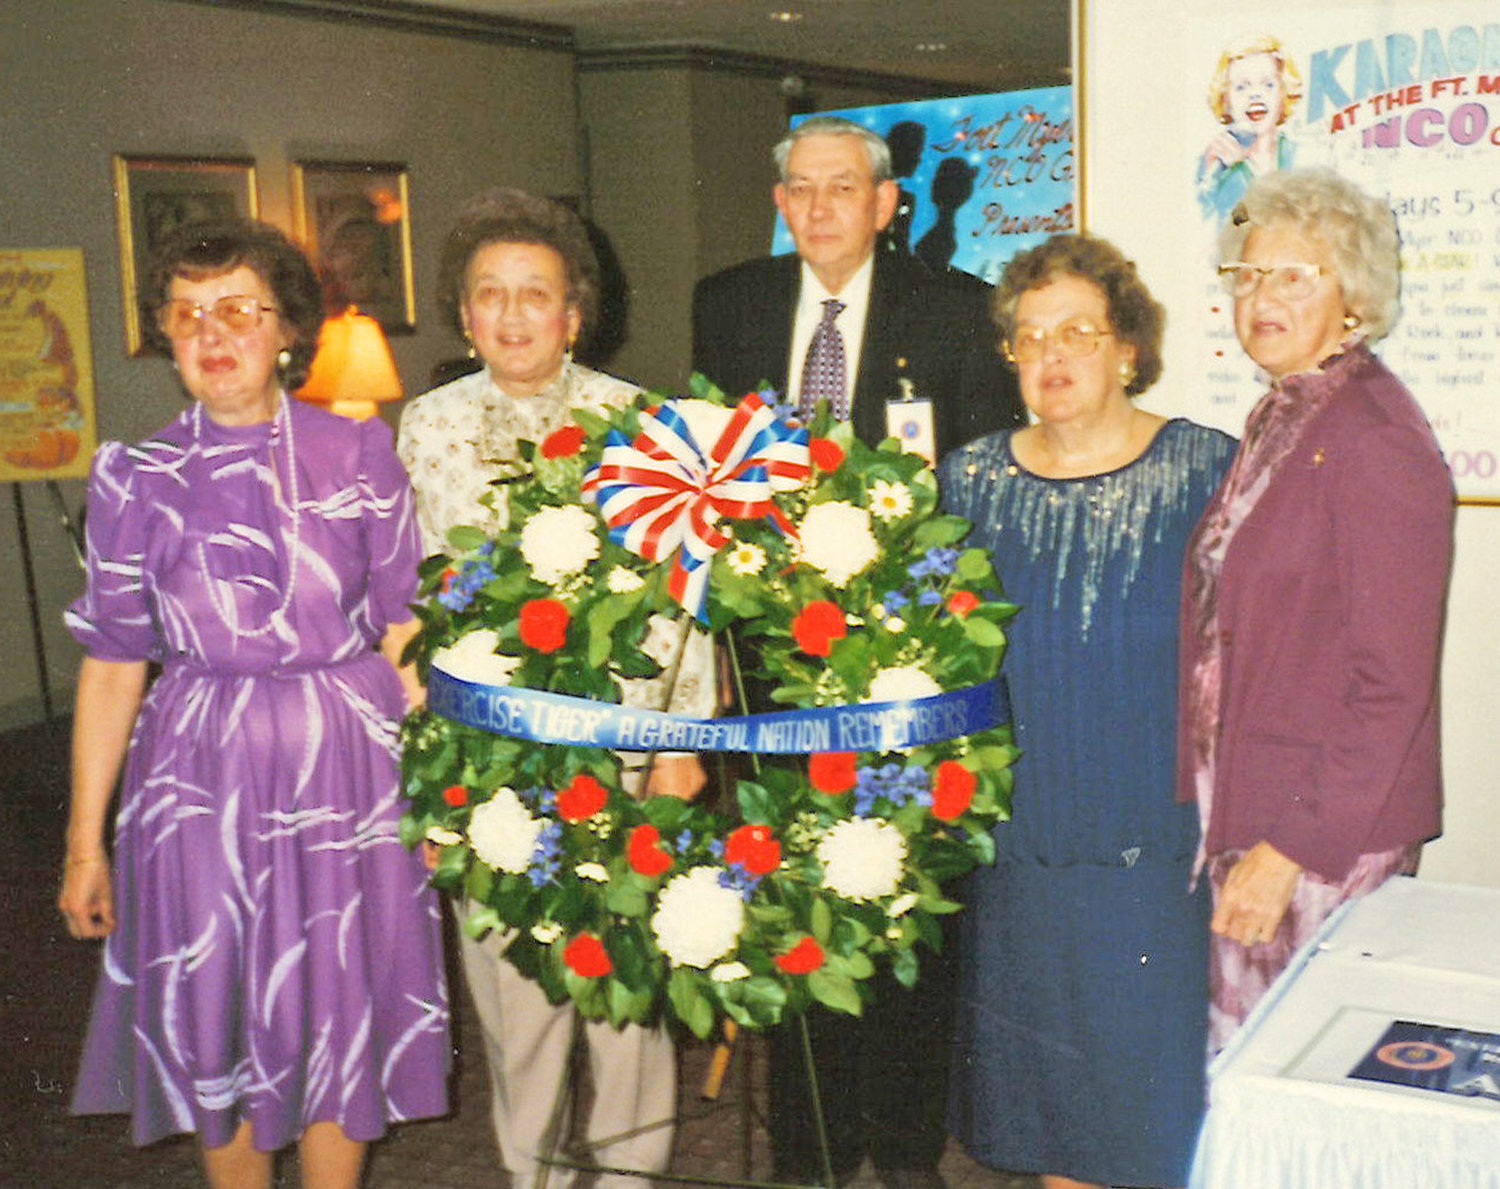 Margaret Mayes stands with family members at the Exercise Tiger Dinner at Fort Myers in November 1995.